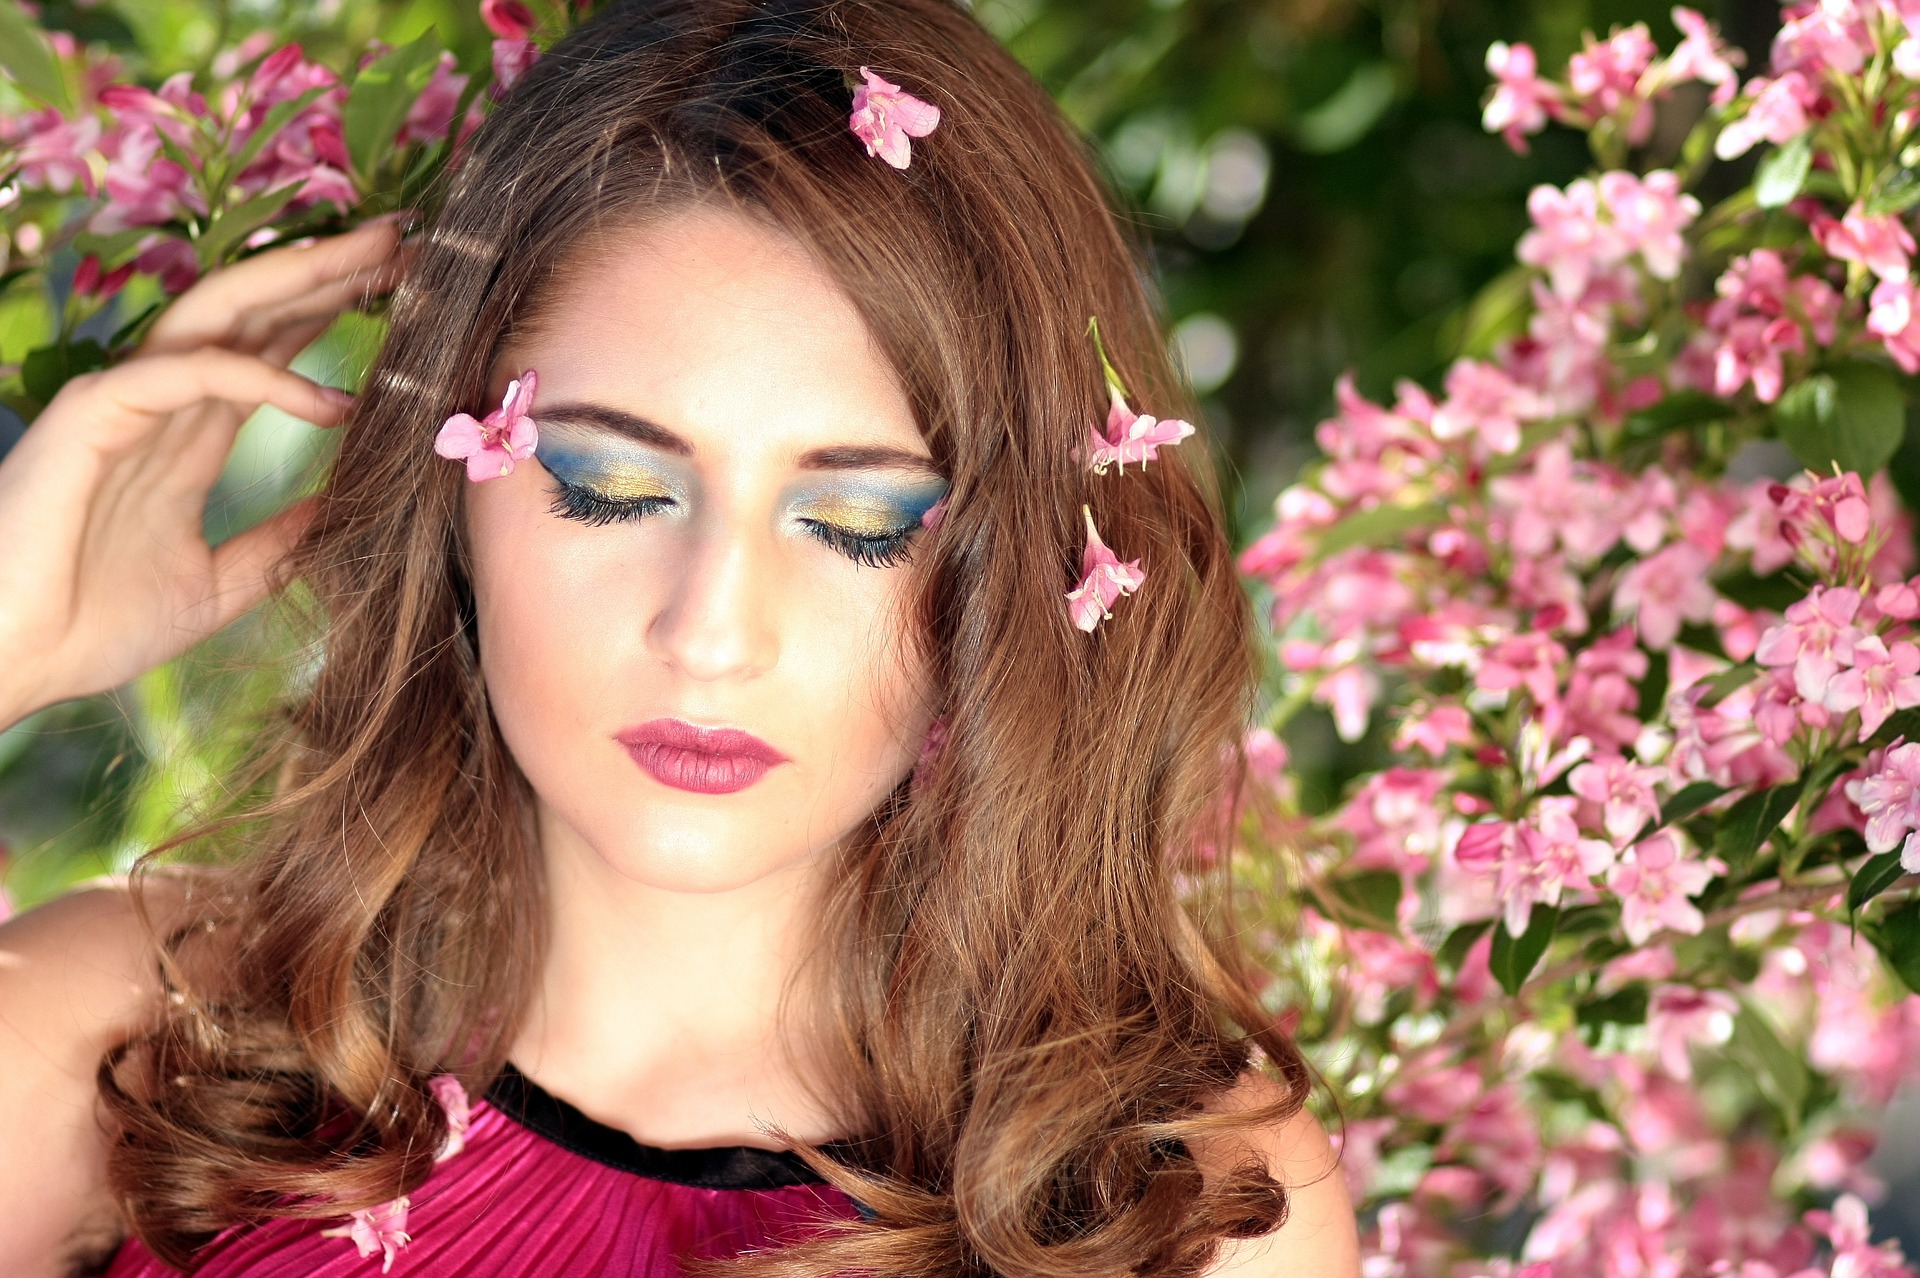 A woman with pink makeup and flowers in her hair and her eyes closed.